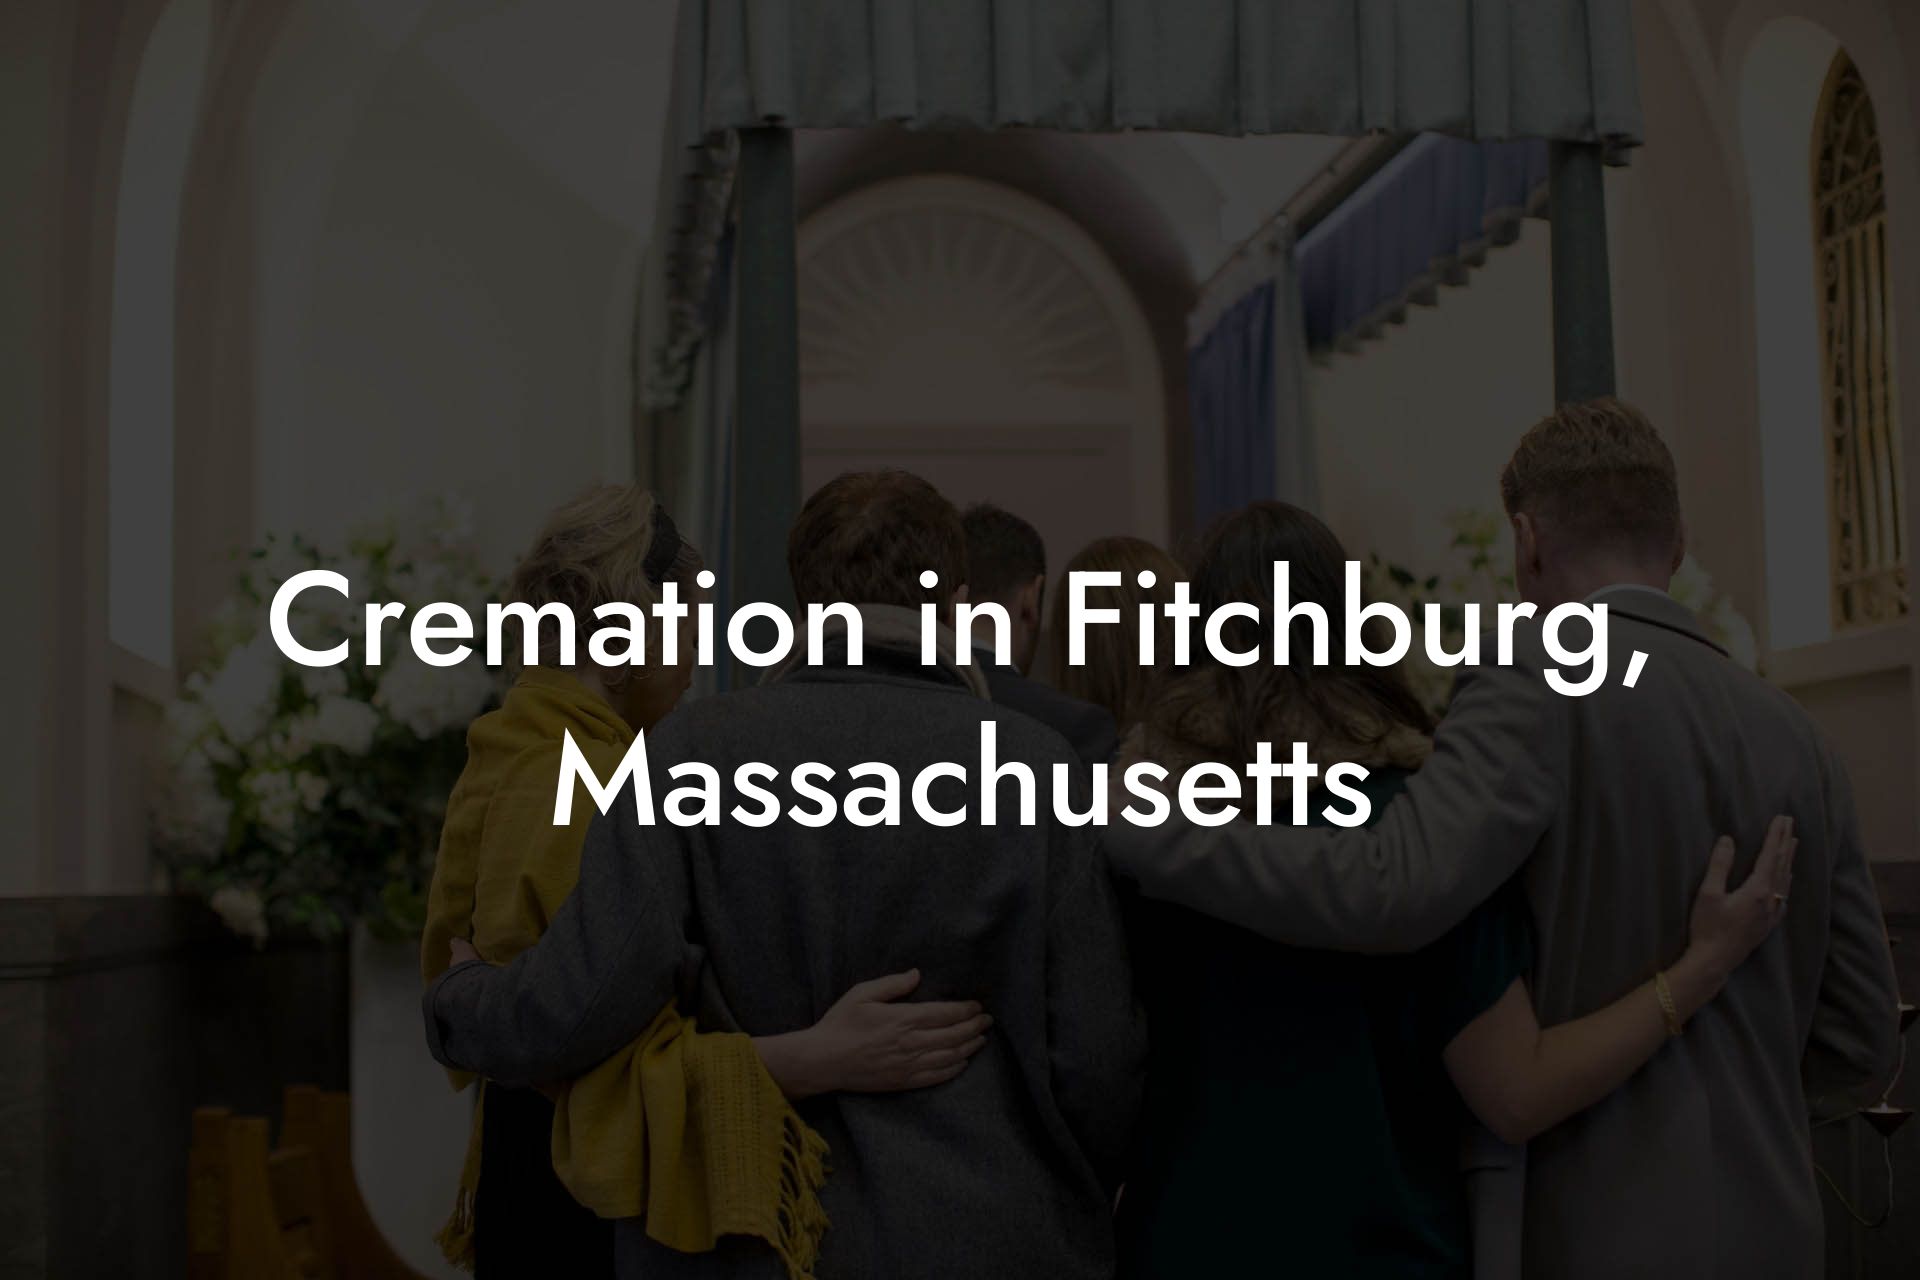 Cremation in Fitchburg, Massachusetts